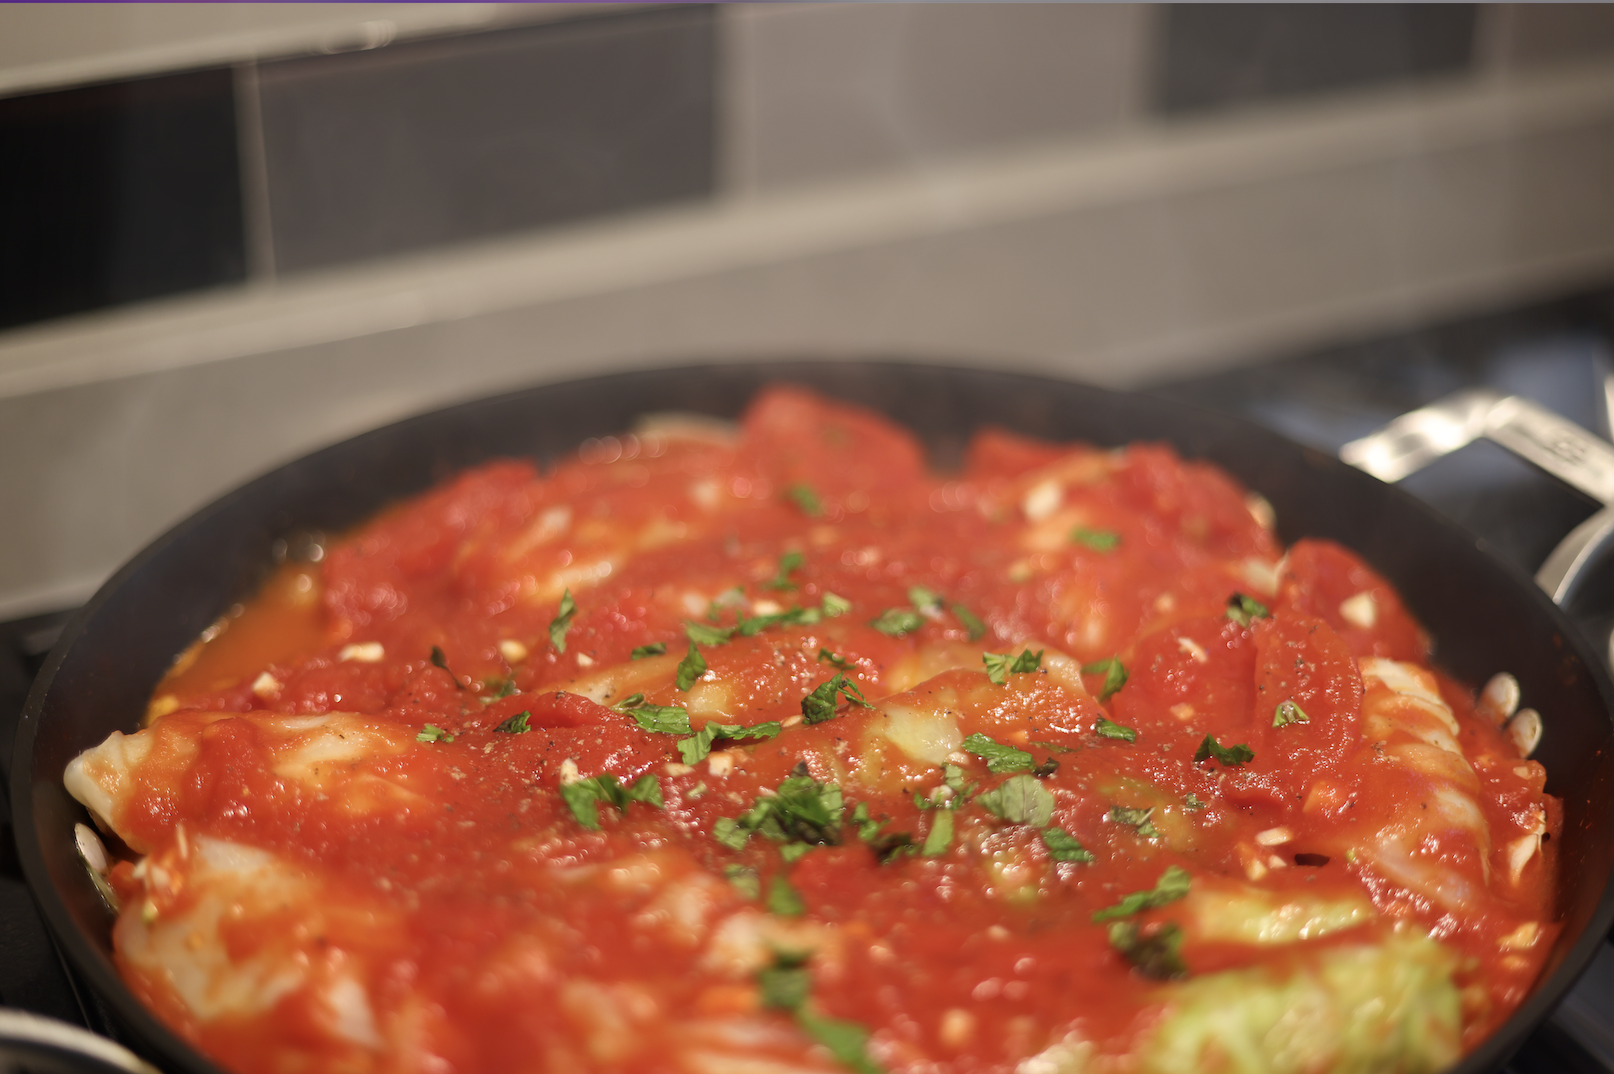 Cabbage rolls simmer in a pot. The Anton family Immigrated to the U.S. in 1904 and has maintained their Lebanese recipes. “Knowing I’m cooking for family and friends always adds extra love to the pot,” Sophia said. 